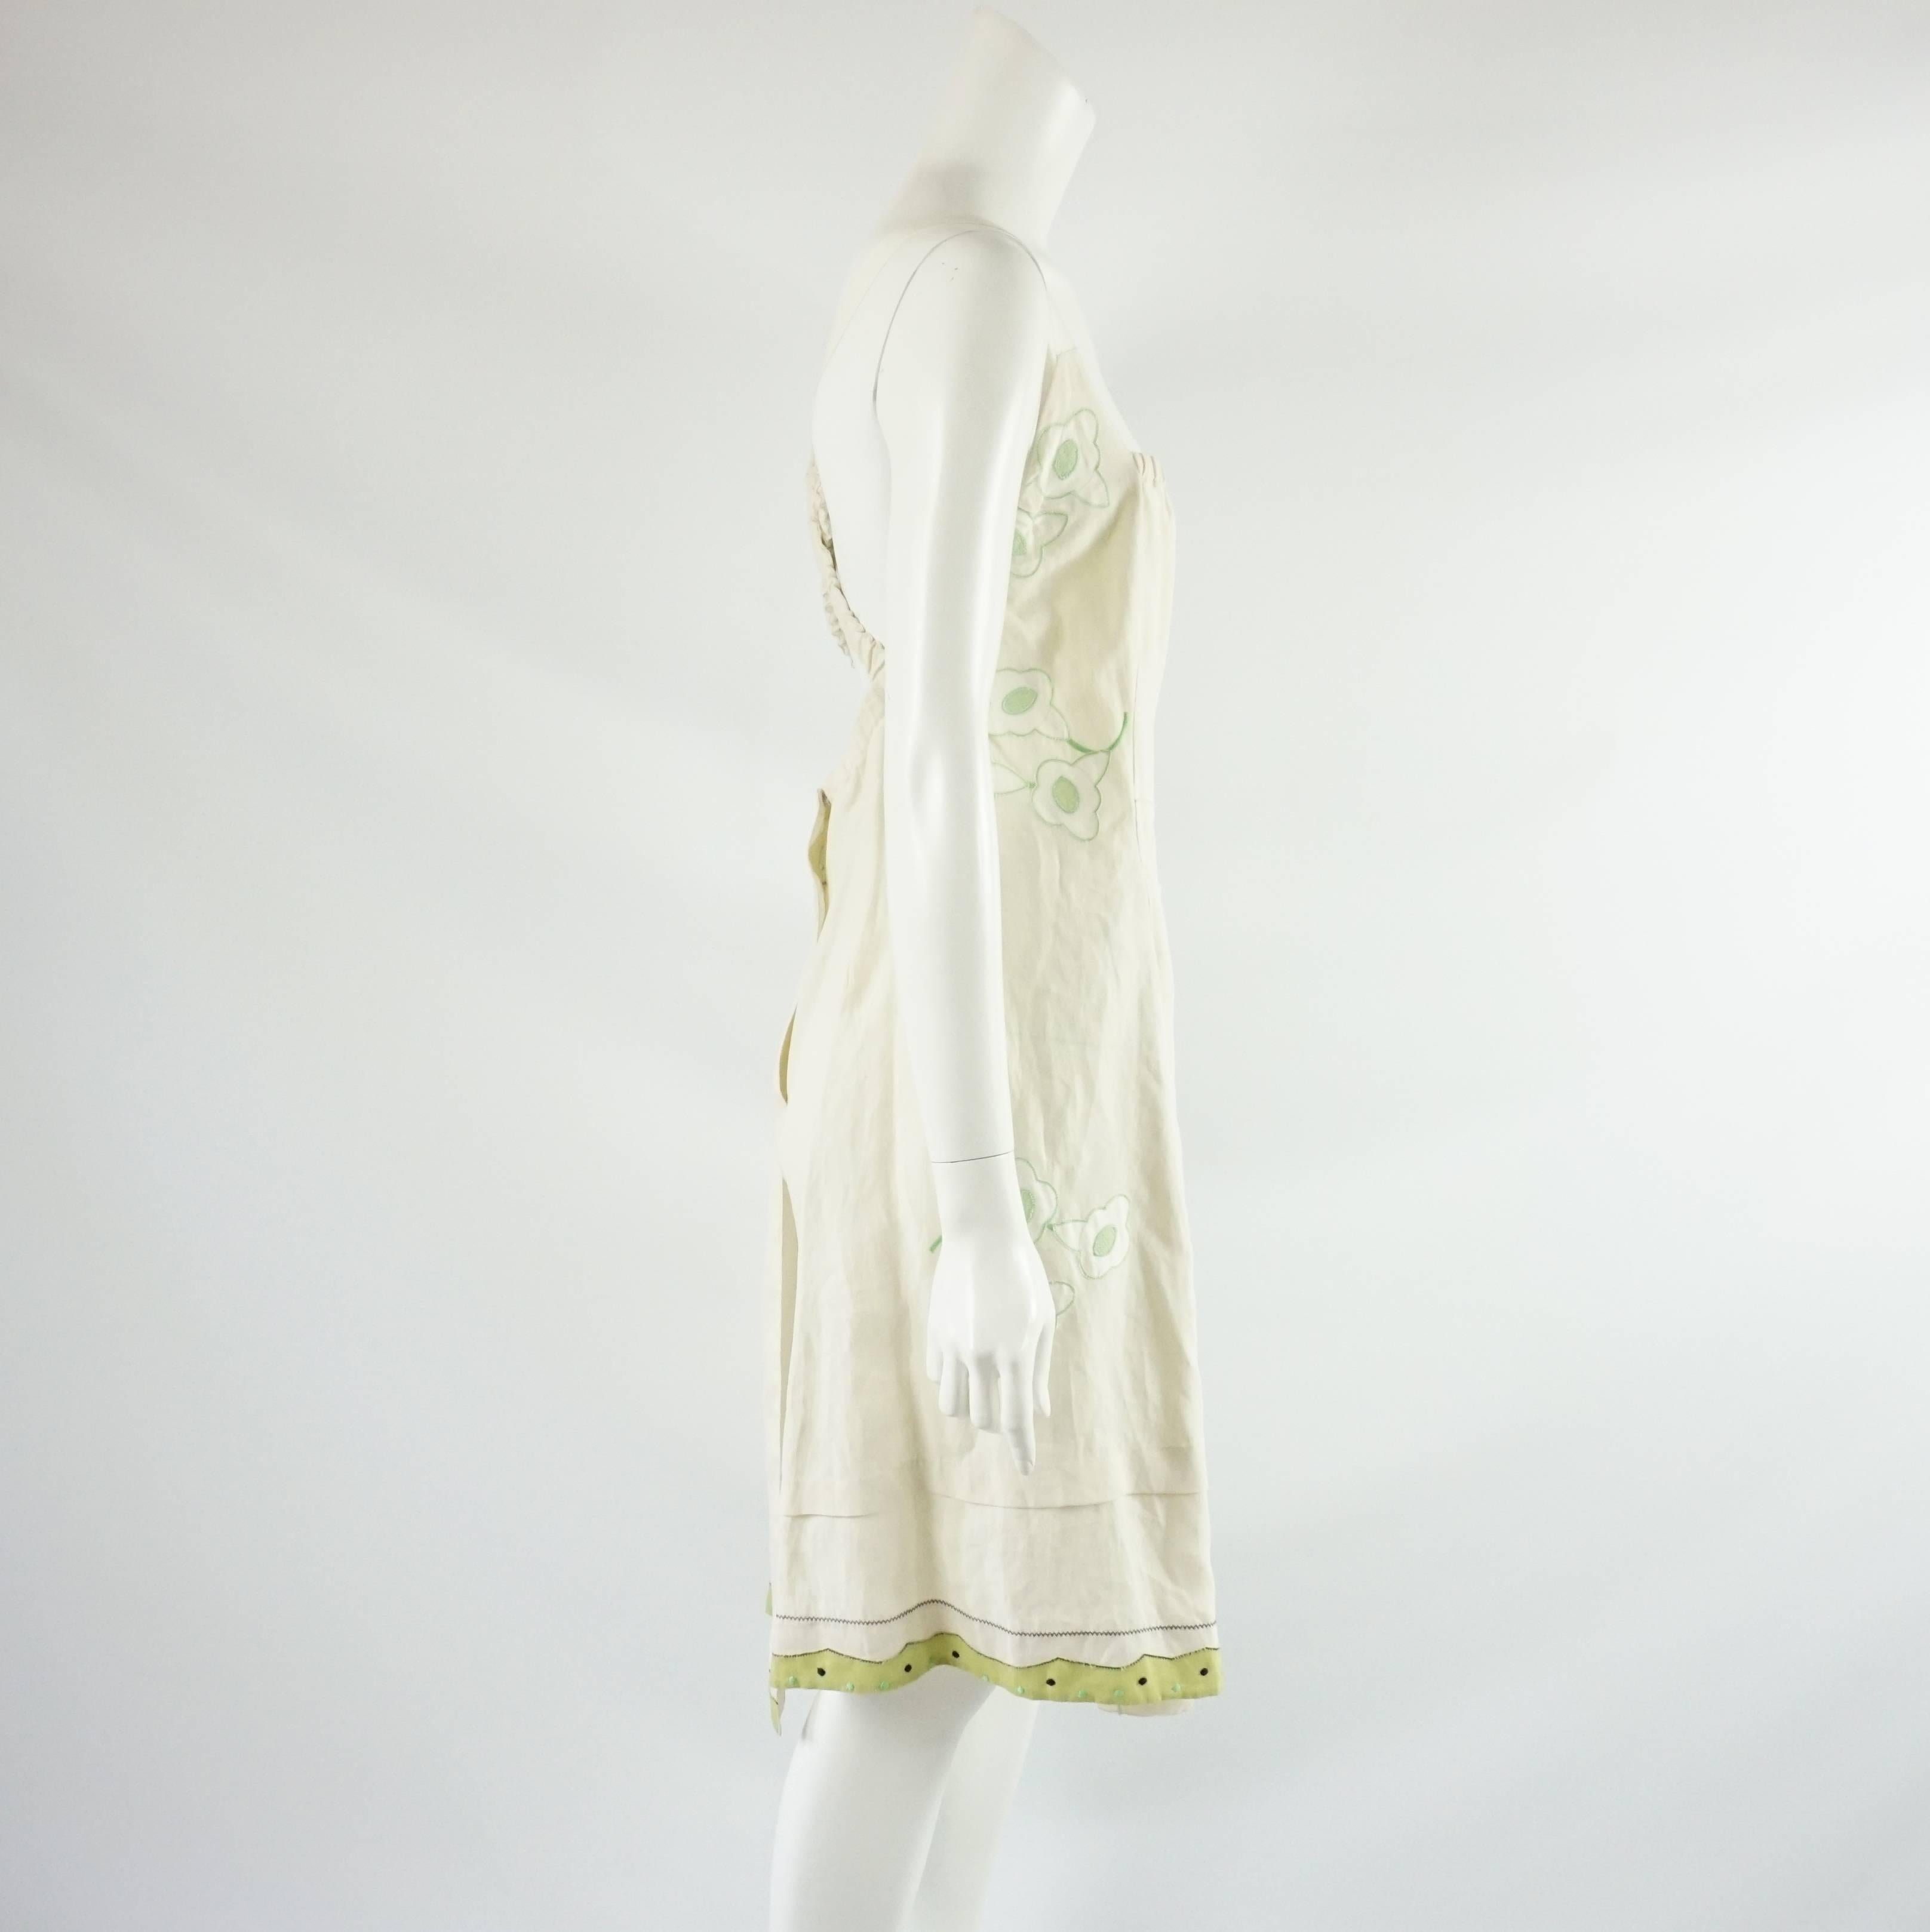 This Prada dress is ivory with green detailing. There is a floral design and dots on the trim. This dress is sleeveless with the grosgrain ribbon and elastic straps crossing each other in the back. The dress crosses over in the back with snap